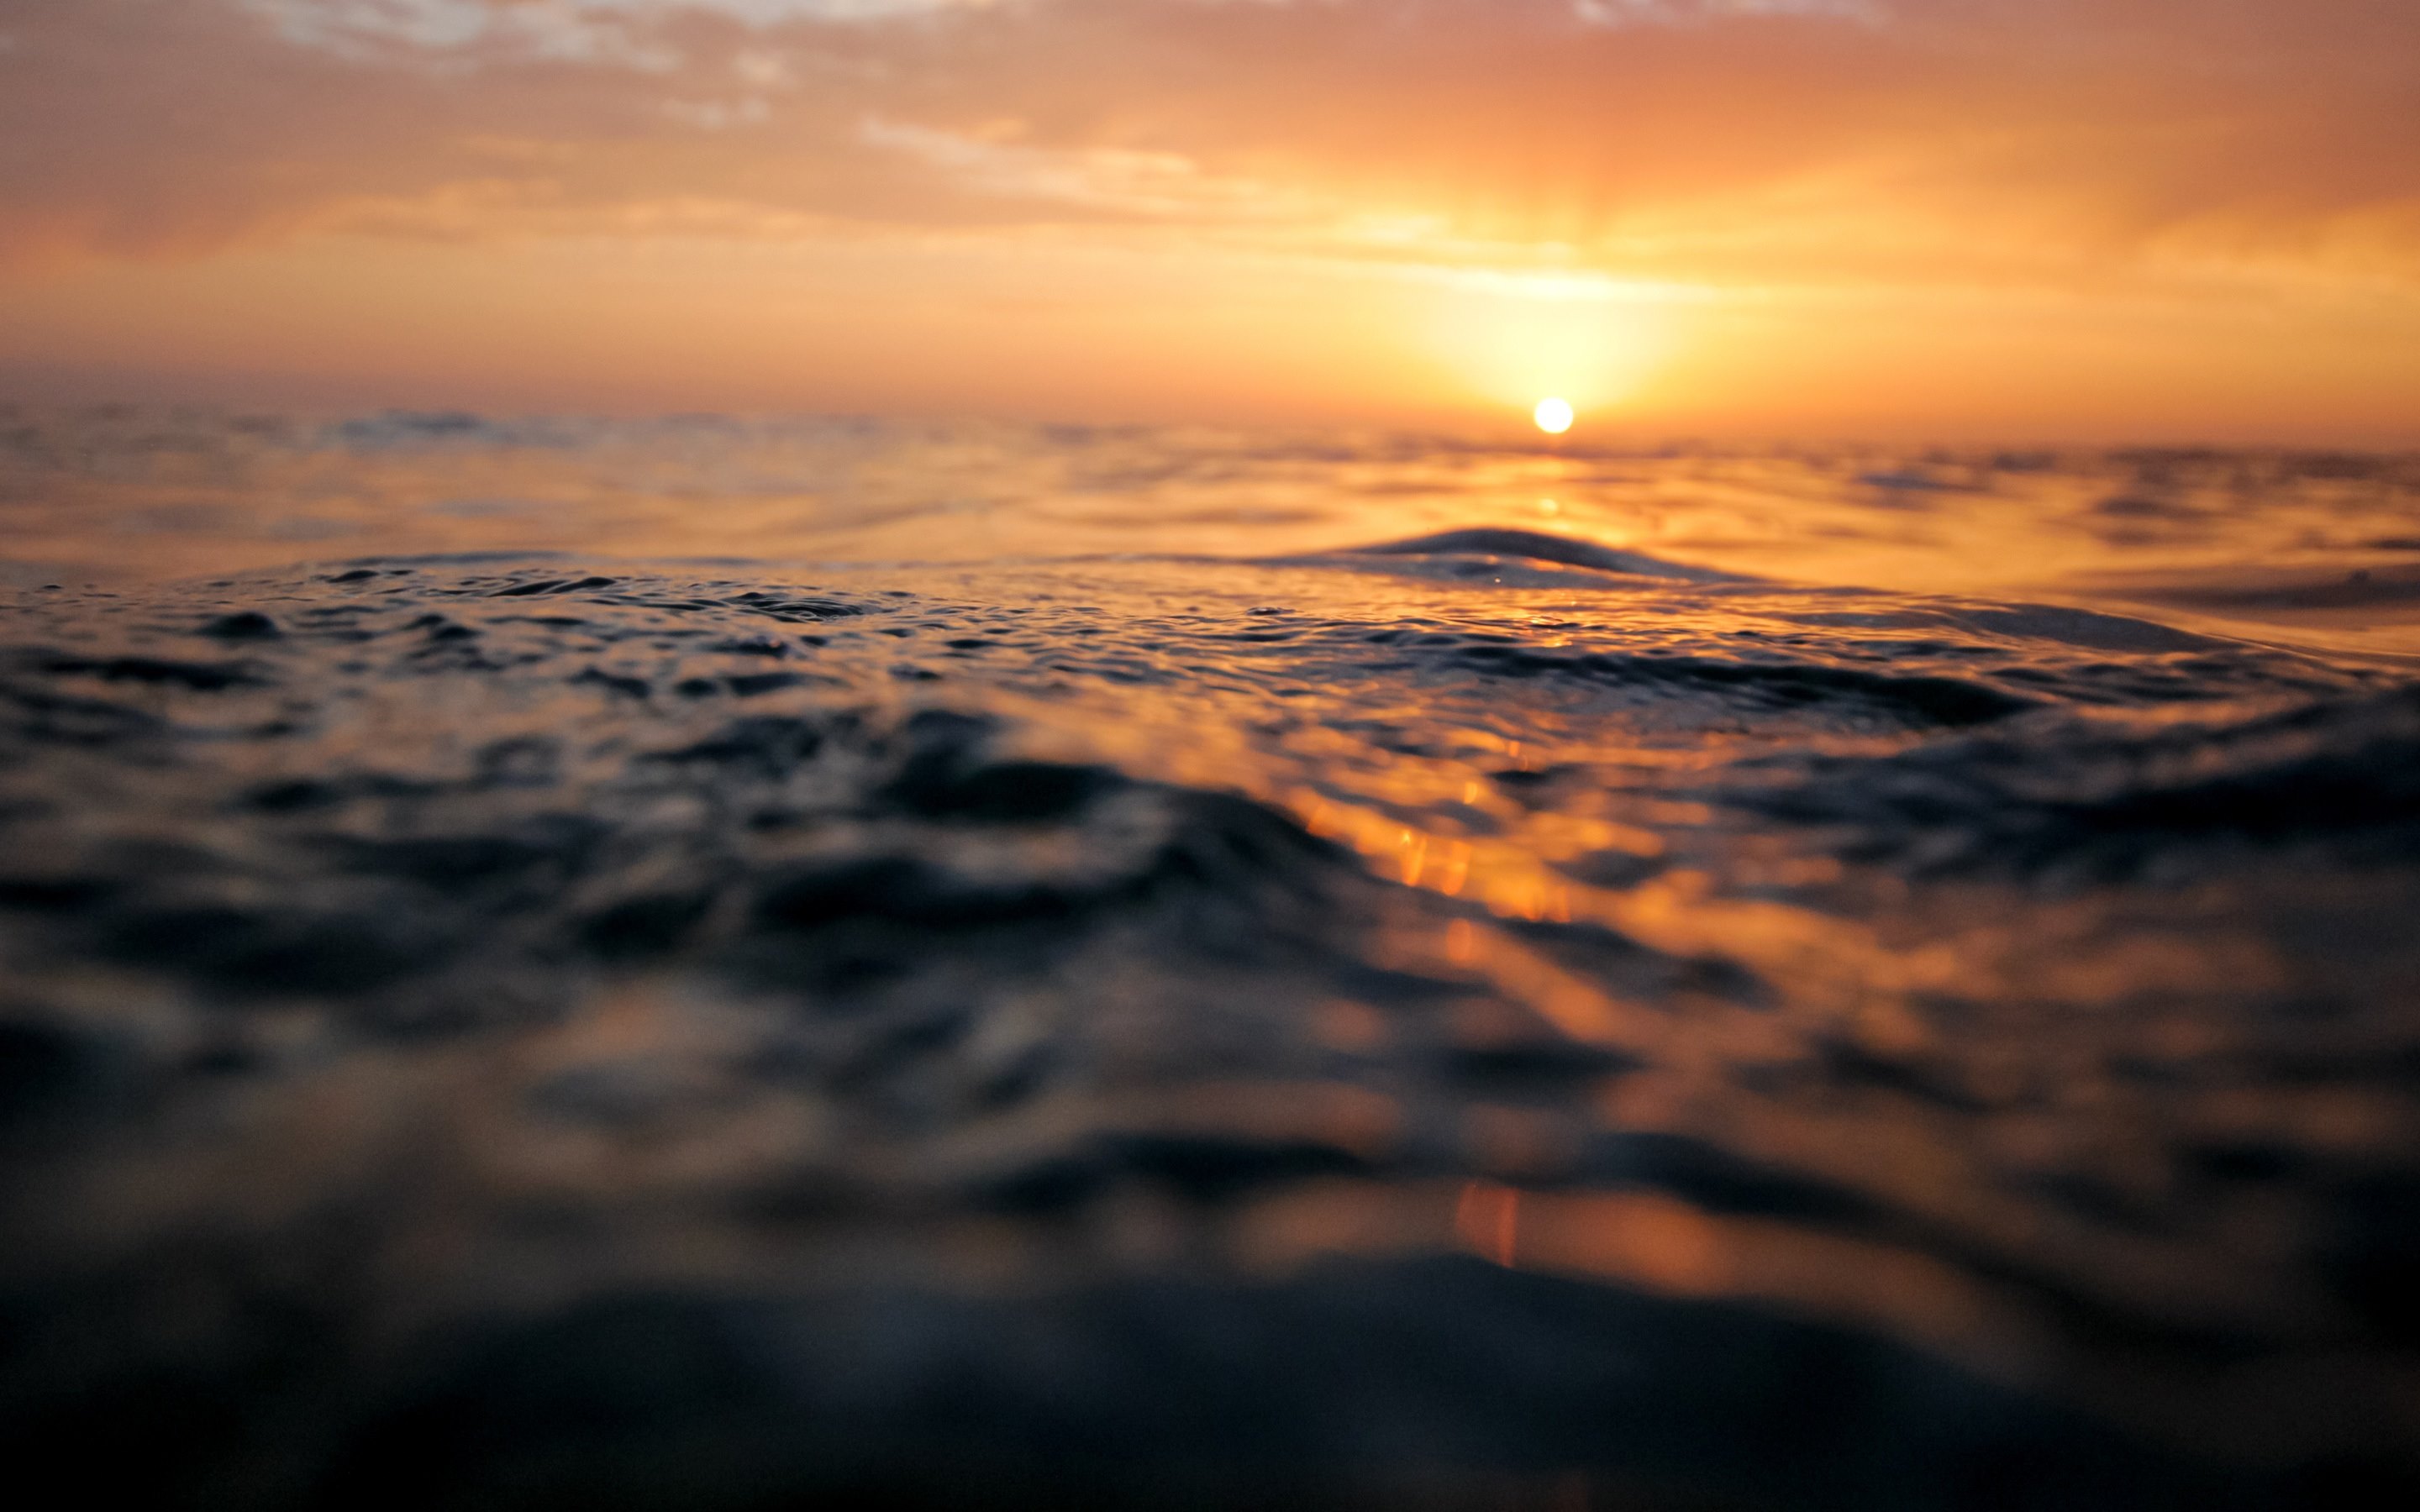 Sunset and Ocean Waves HD Wallpapers. 4K Wallpapers